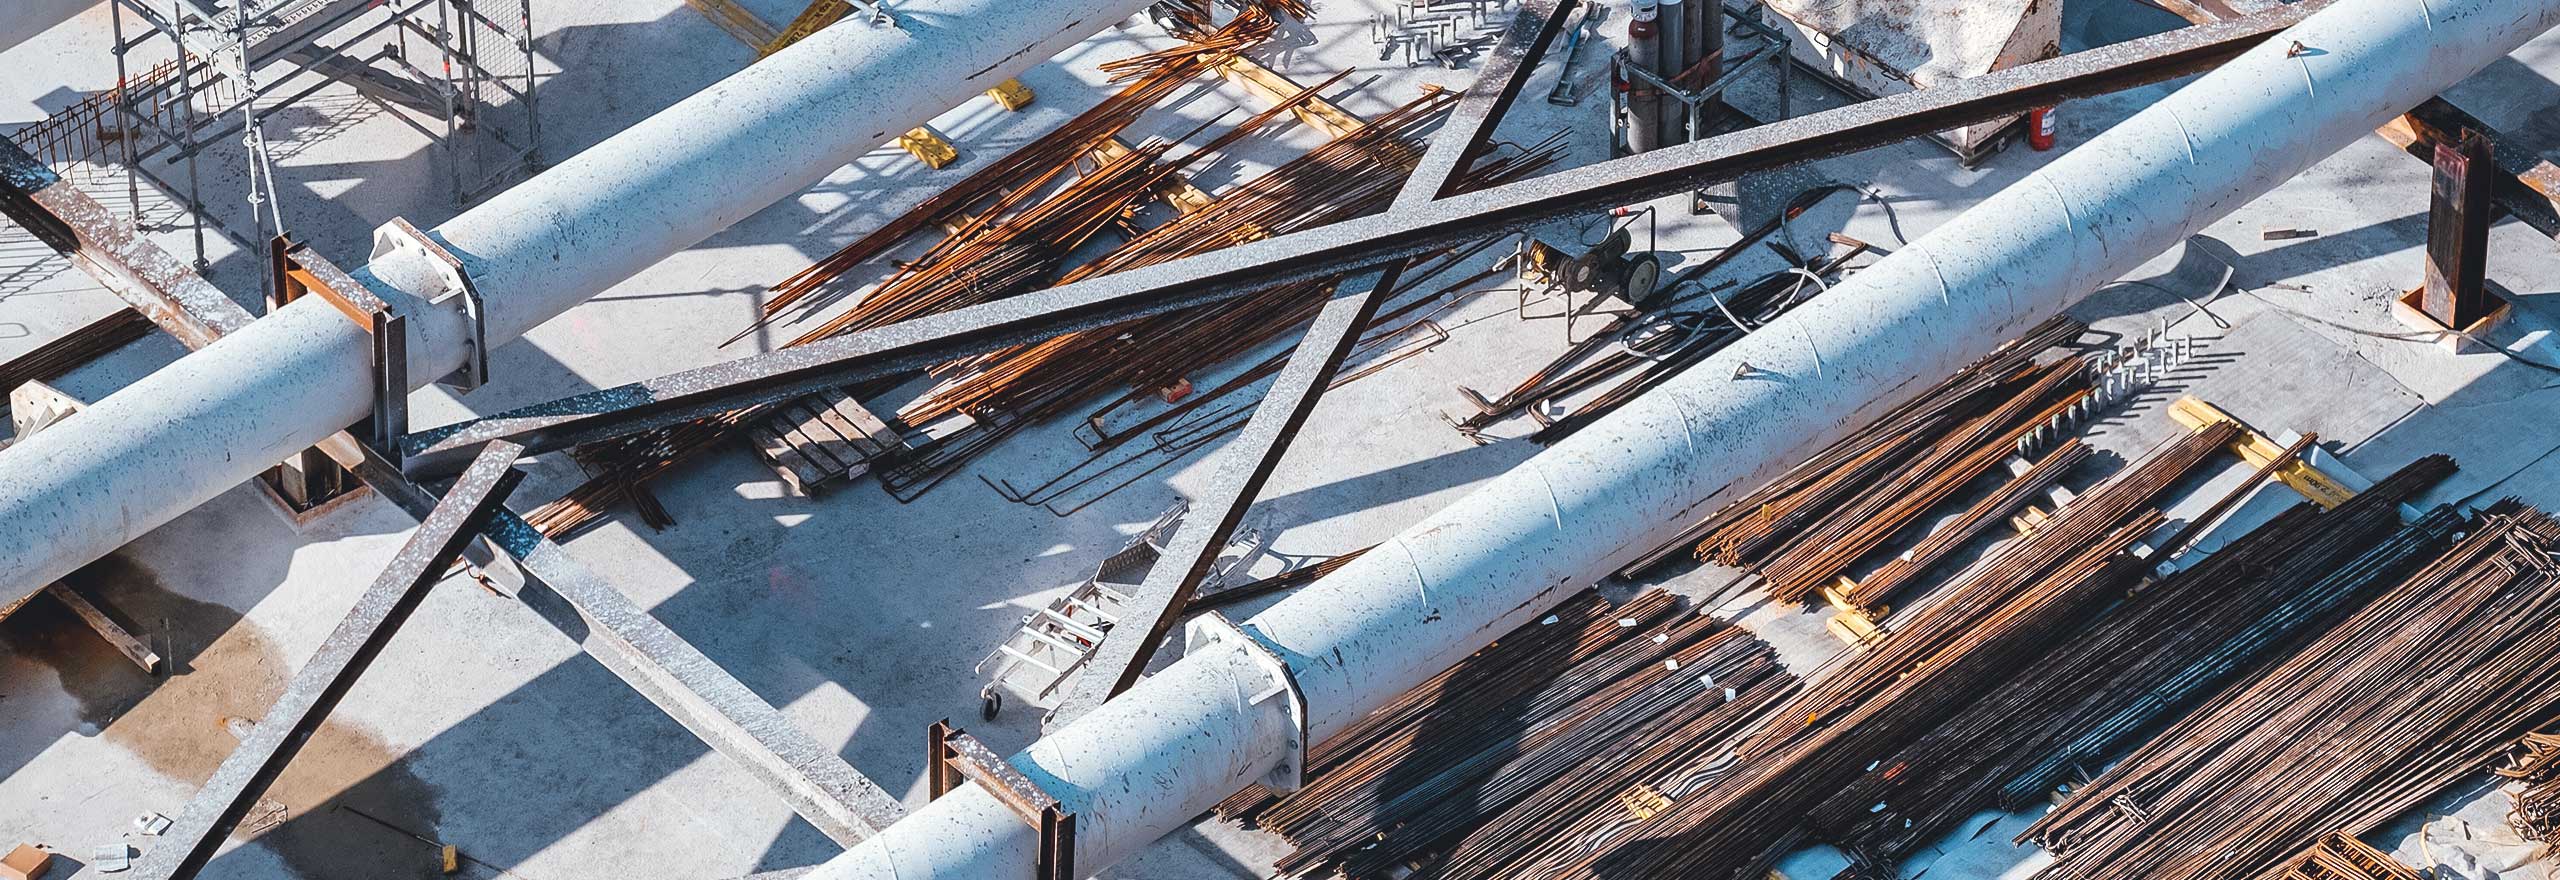 Image of pipes and scaffolding at construction site